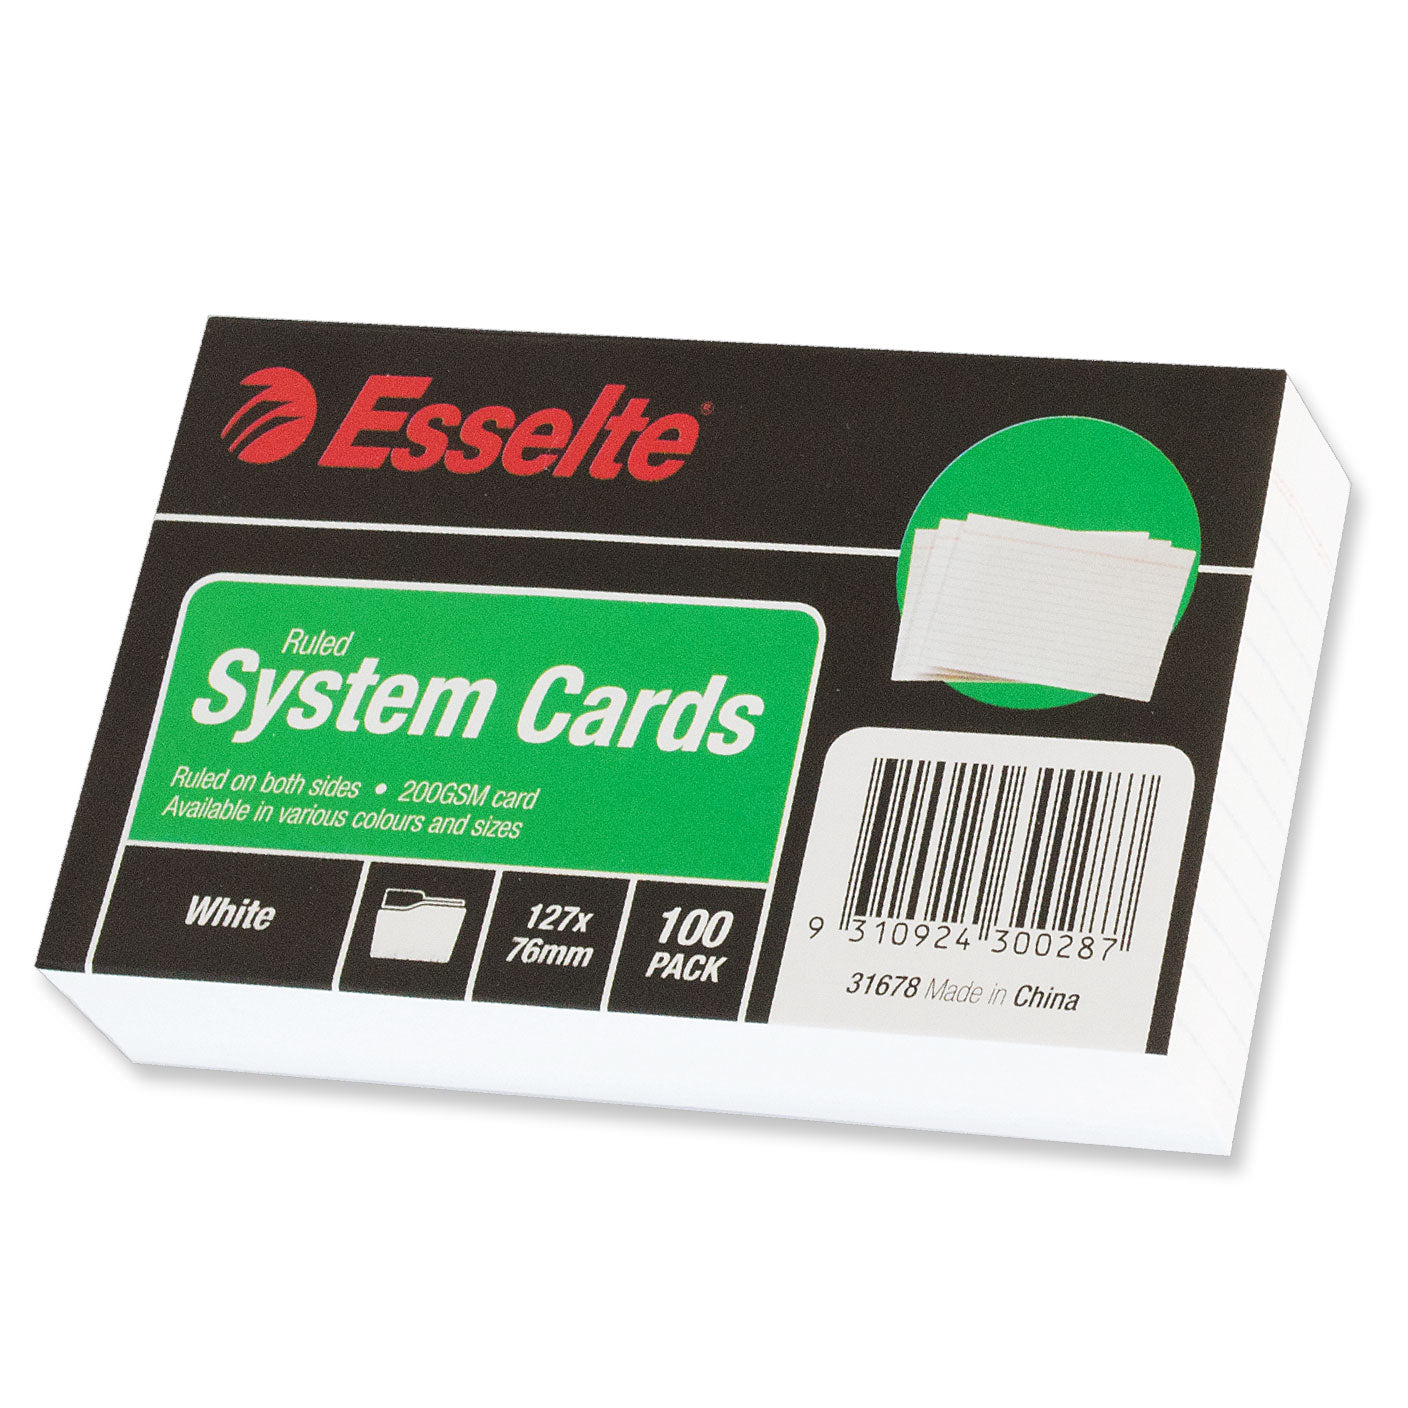 Esselte System Cards Ruled 127 x 76 mm White Pack 100